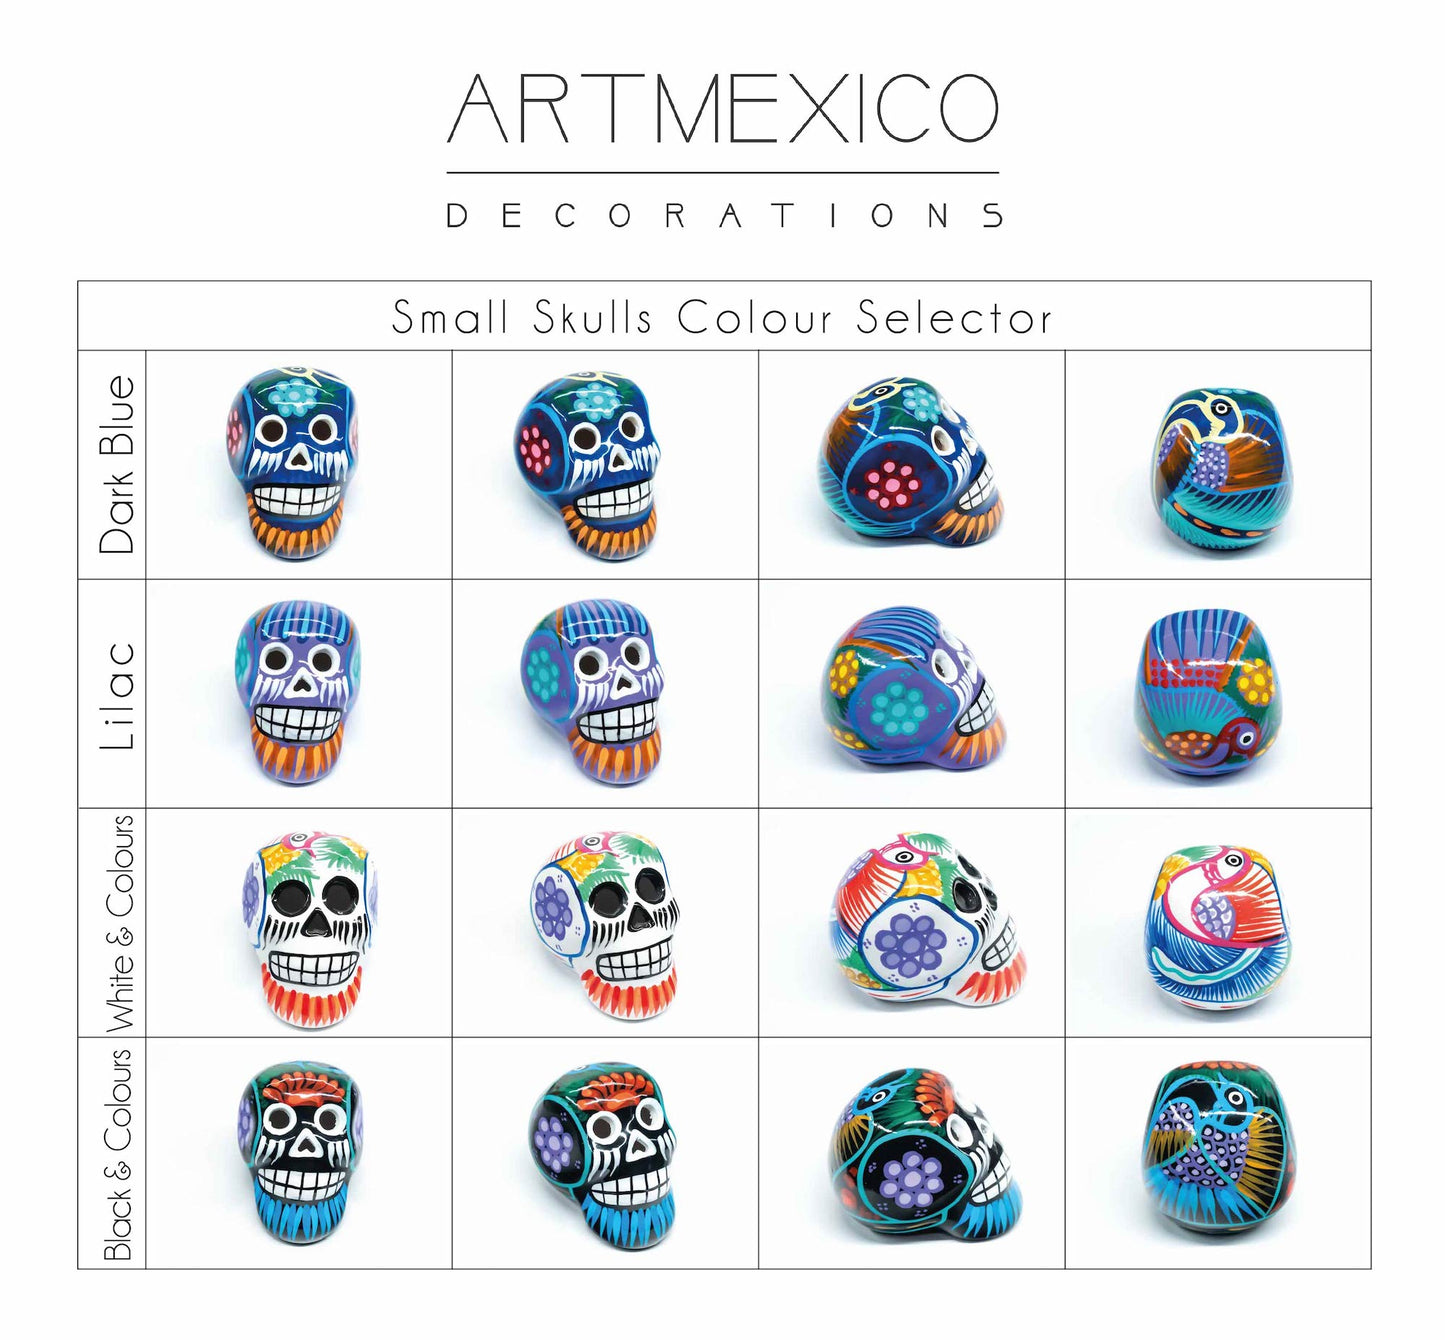 50 Small Mexican Ceramic Skulls Wholesale, Day of the Dead Decorations, Individually Gift Boxed